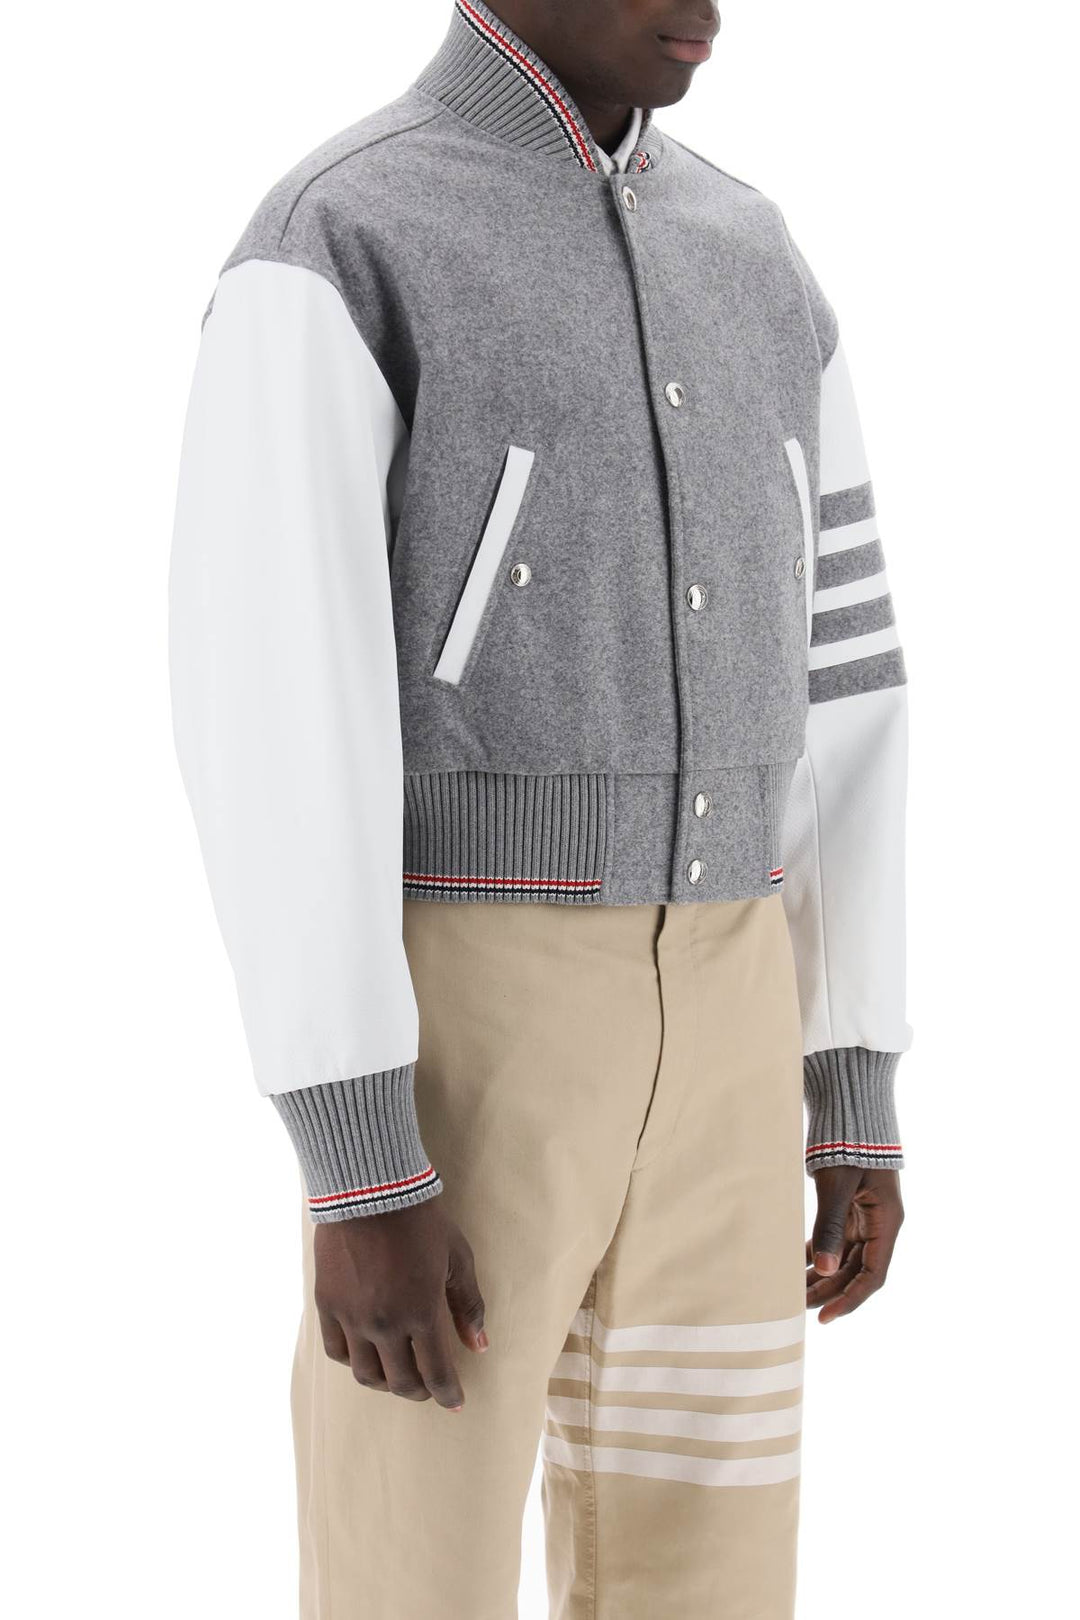 Thom Browne Wool Bomber Jacket With Leather Sleeves And   Grigio